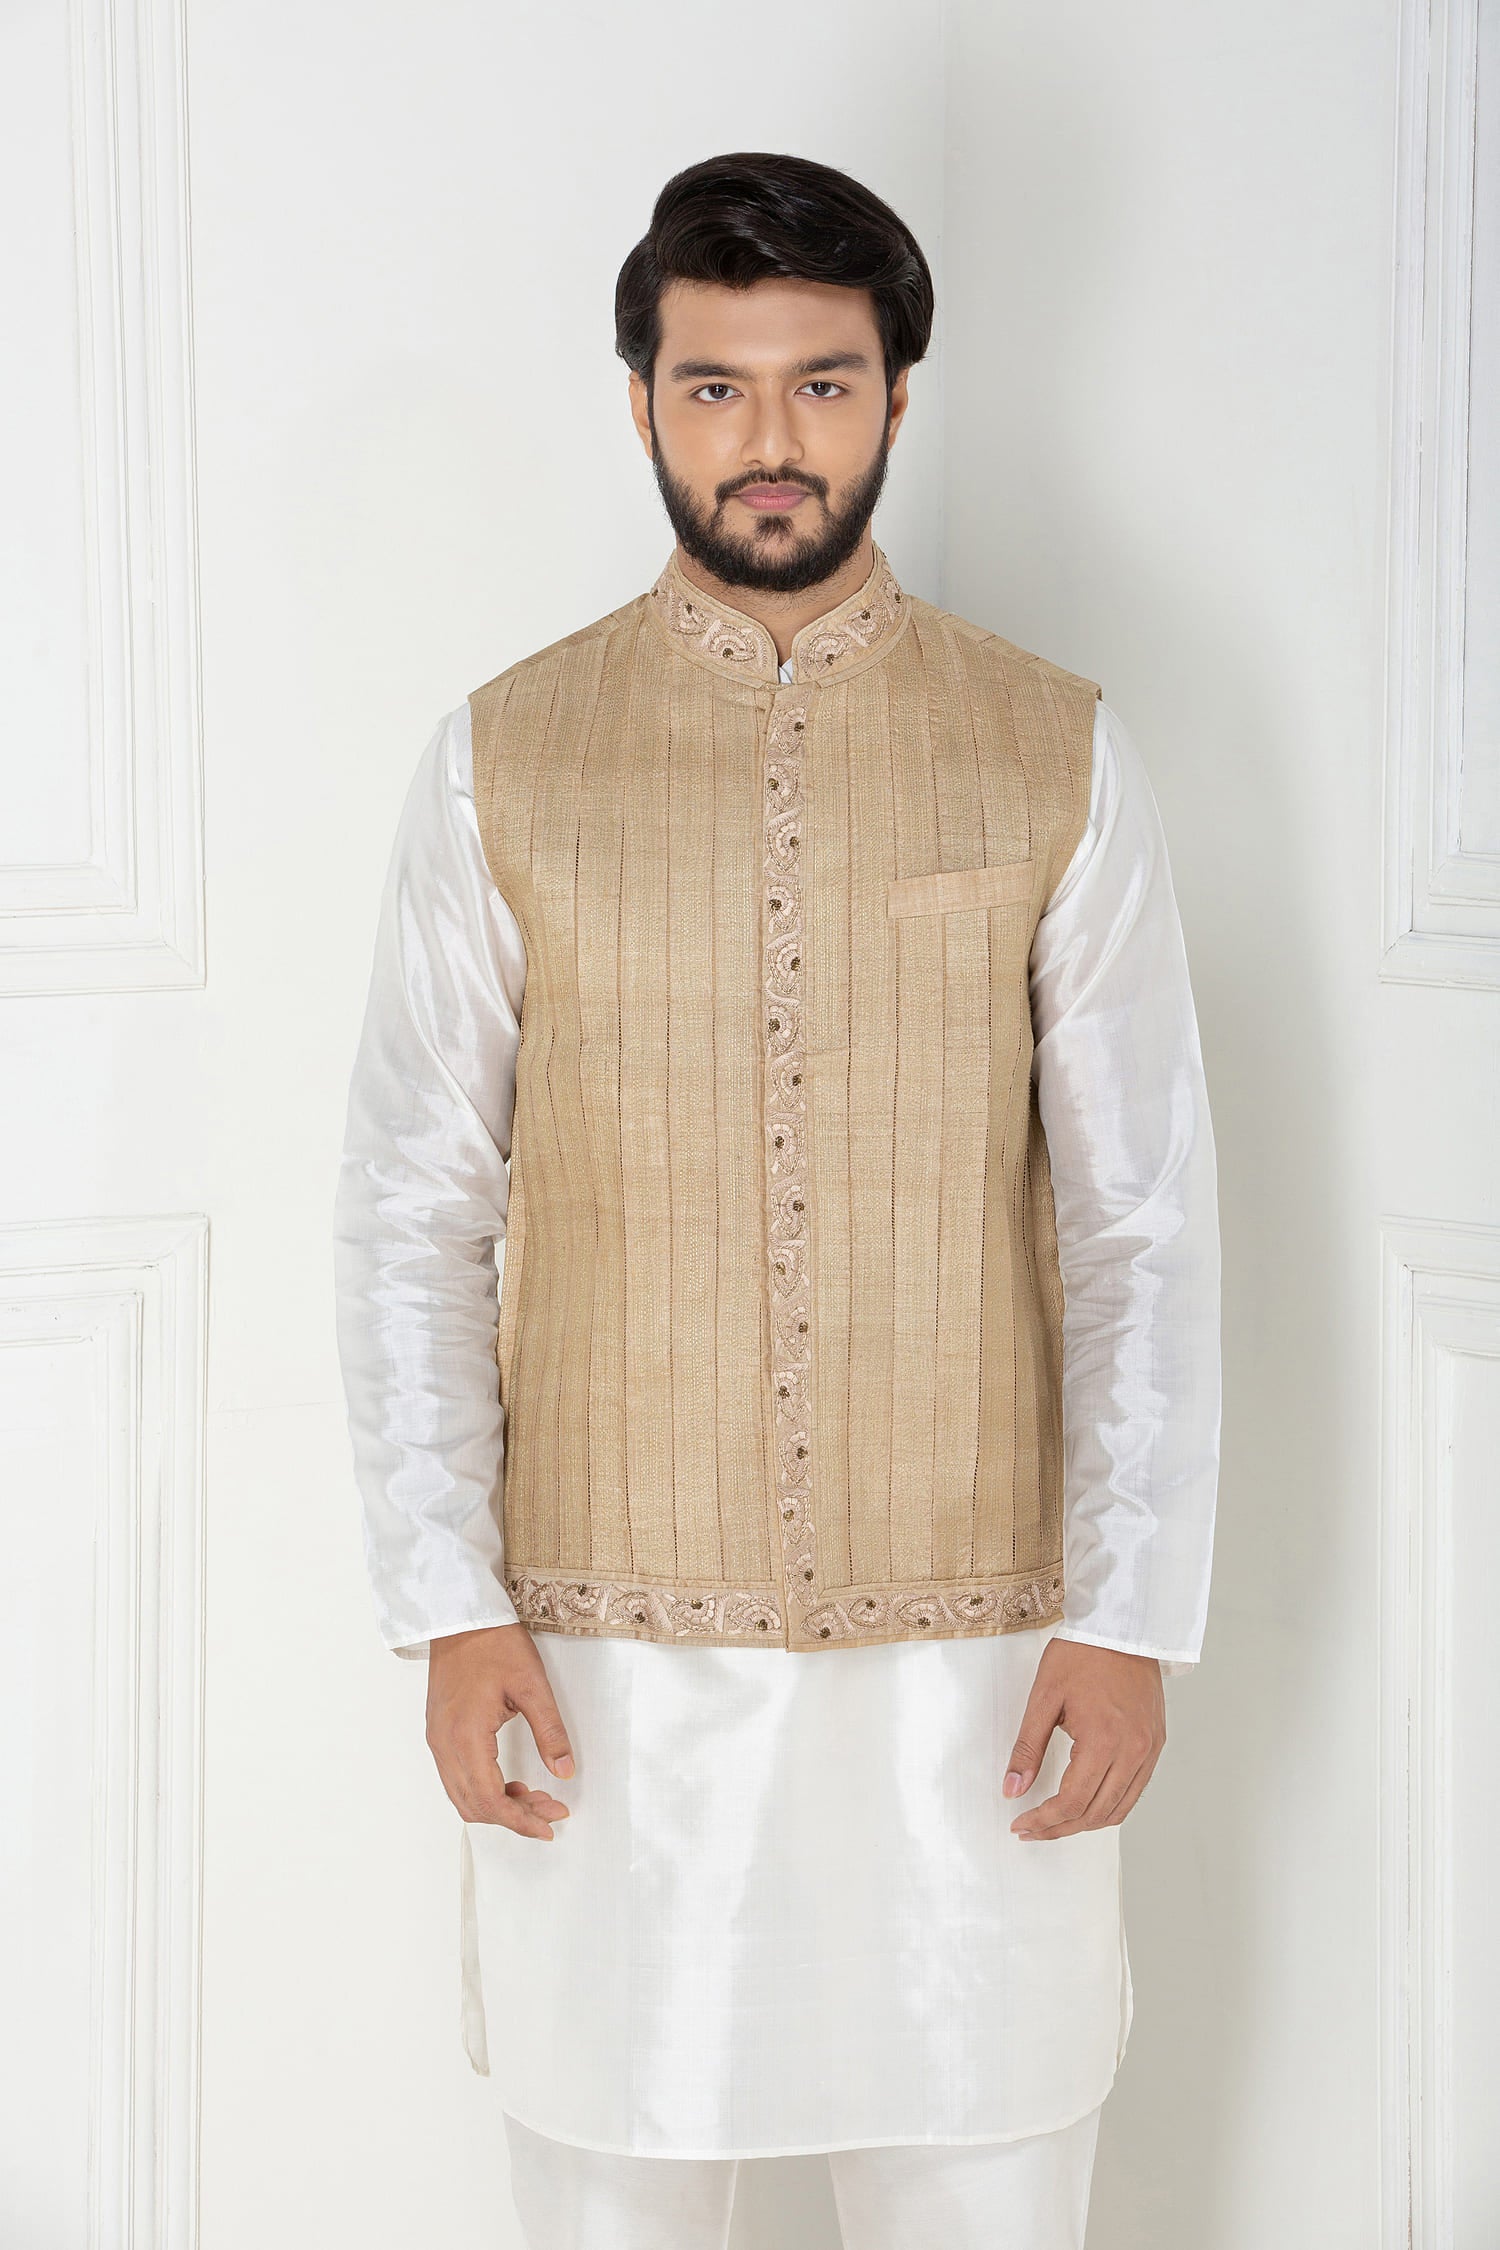 Zani And Jalidar Panel Waistcoat With Embroidered Colour And Button Patti + Hem